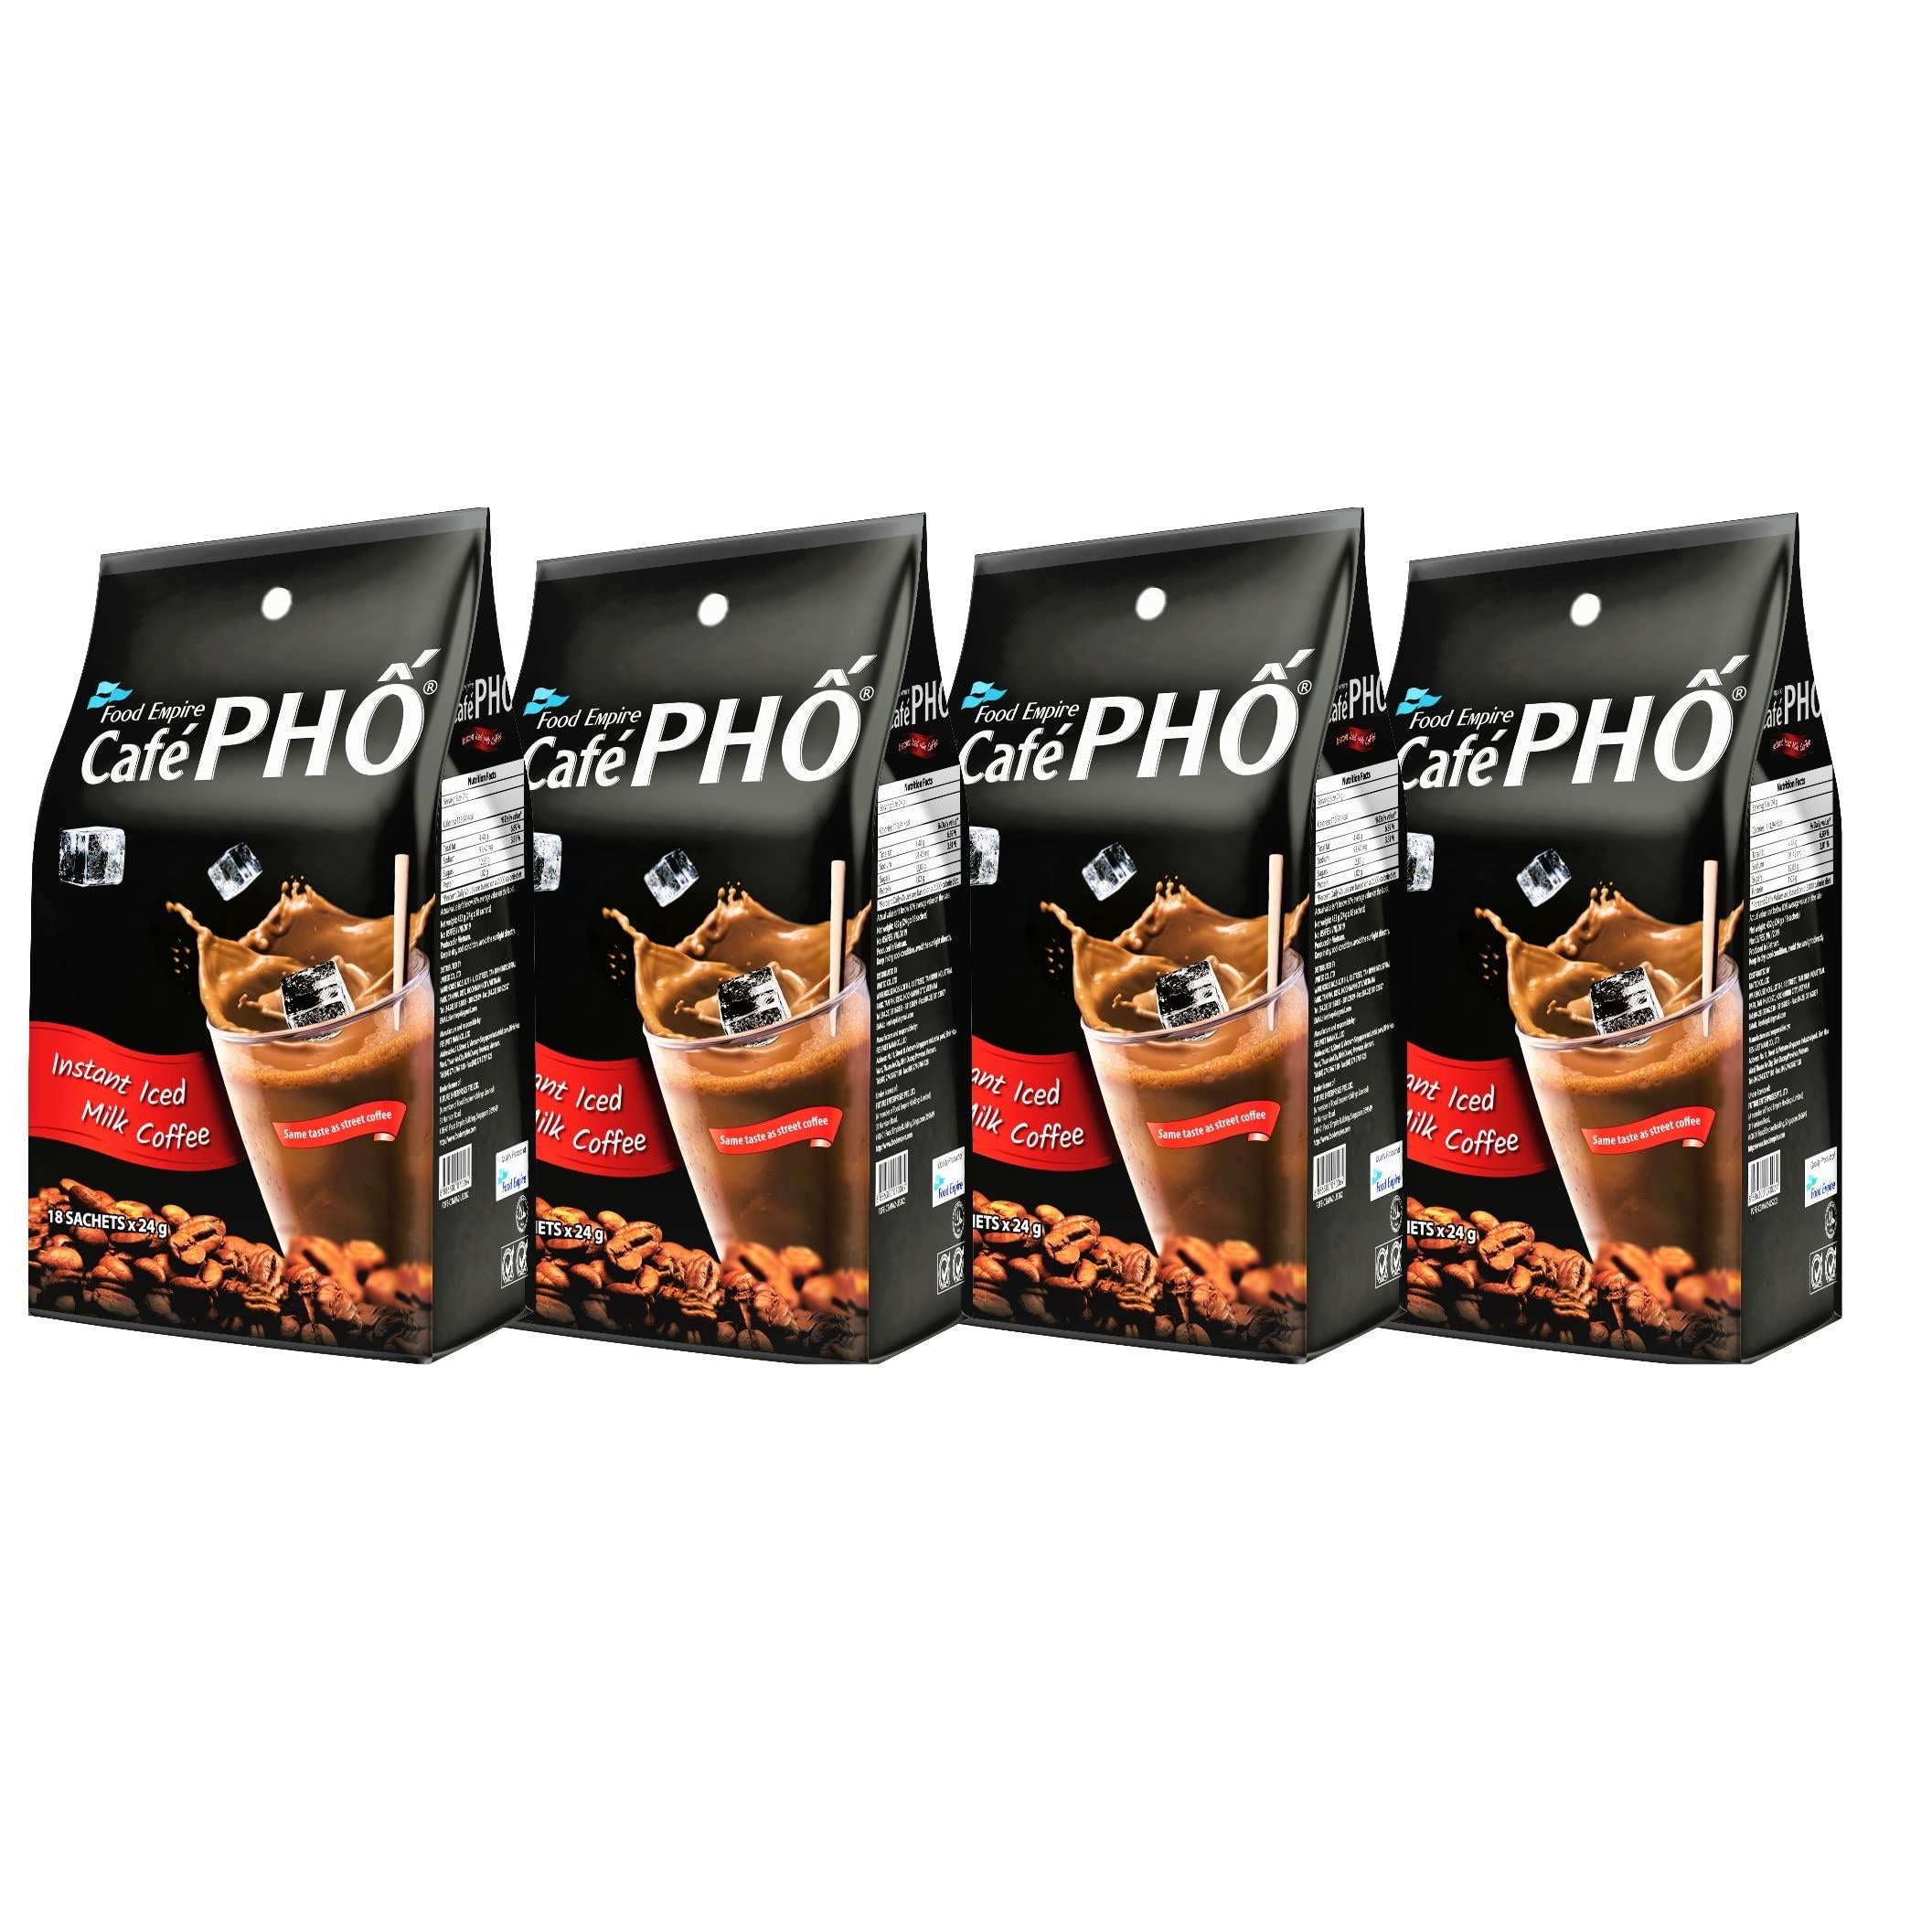 Cafe Pho Vietnamese 3in1 Instant Coffee Mix, Iced Milk Coffee, Cafe Sua Da, Single Serve Coffee Packets, Bag of 18 Sachets, Pack of 4